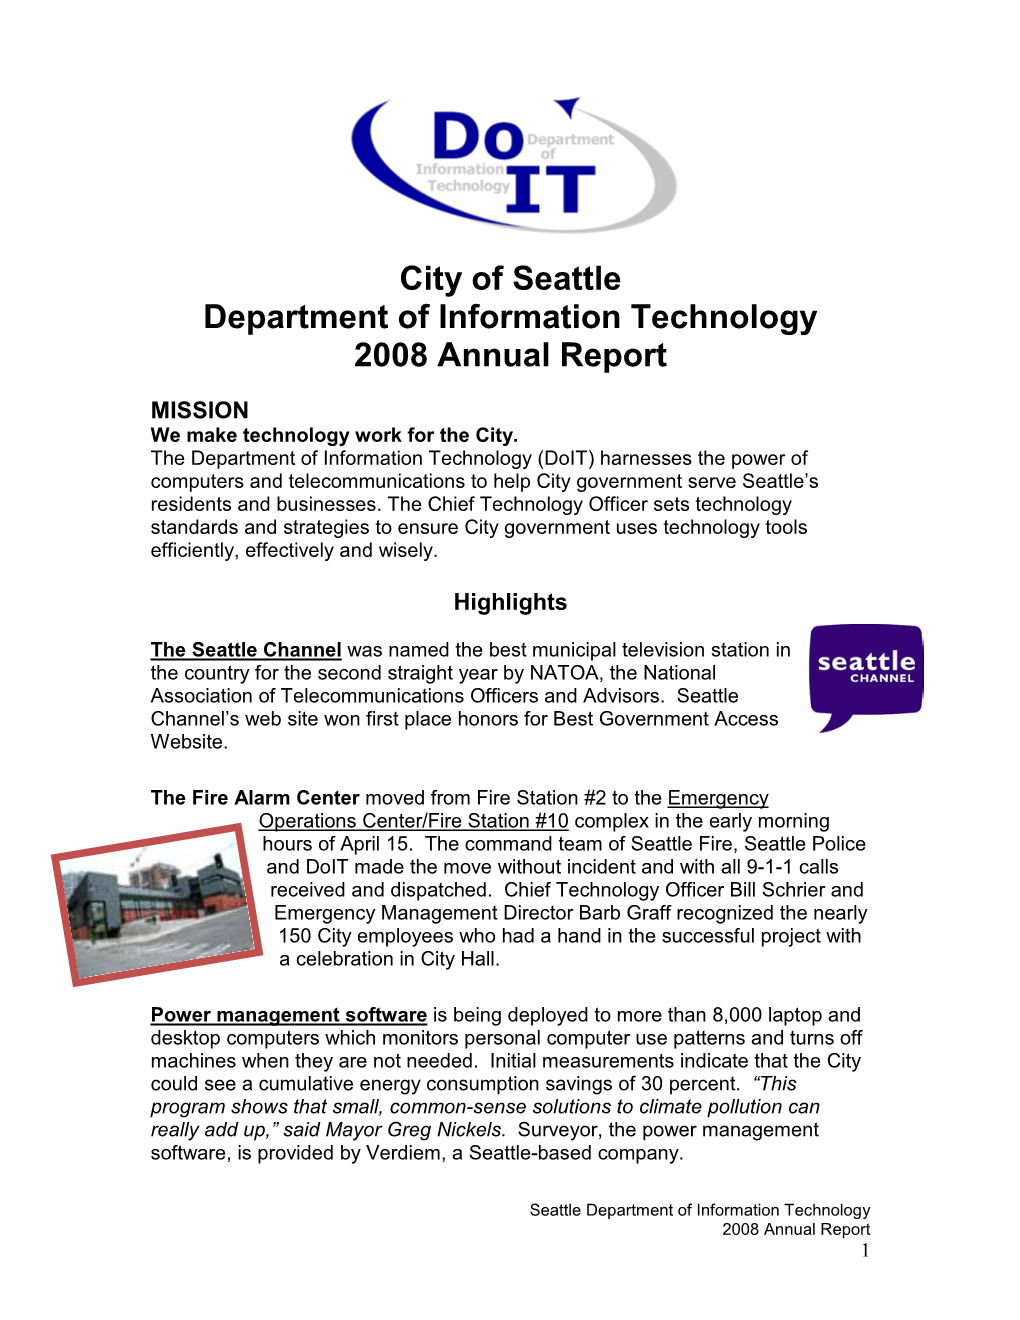 City of Seattle Department of Information Technology 2008 Annual Report